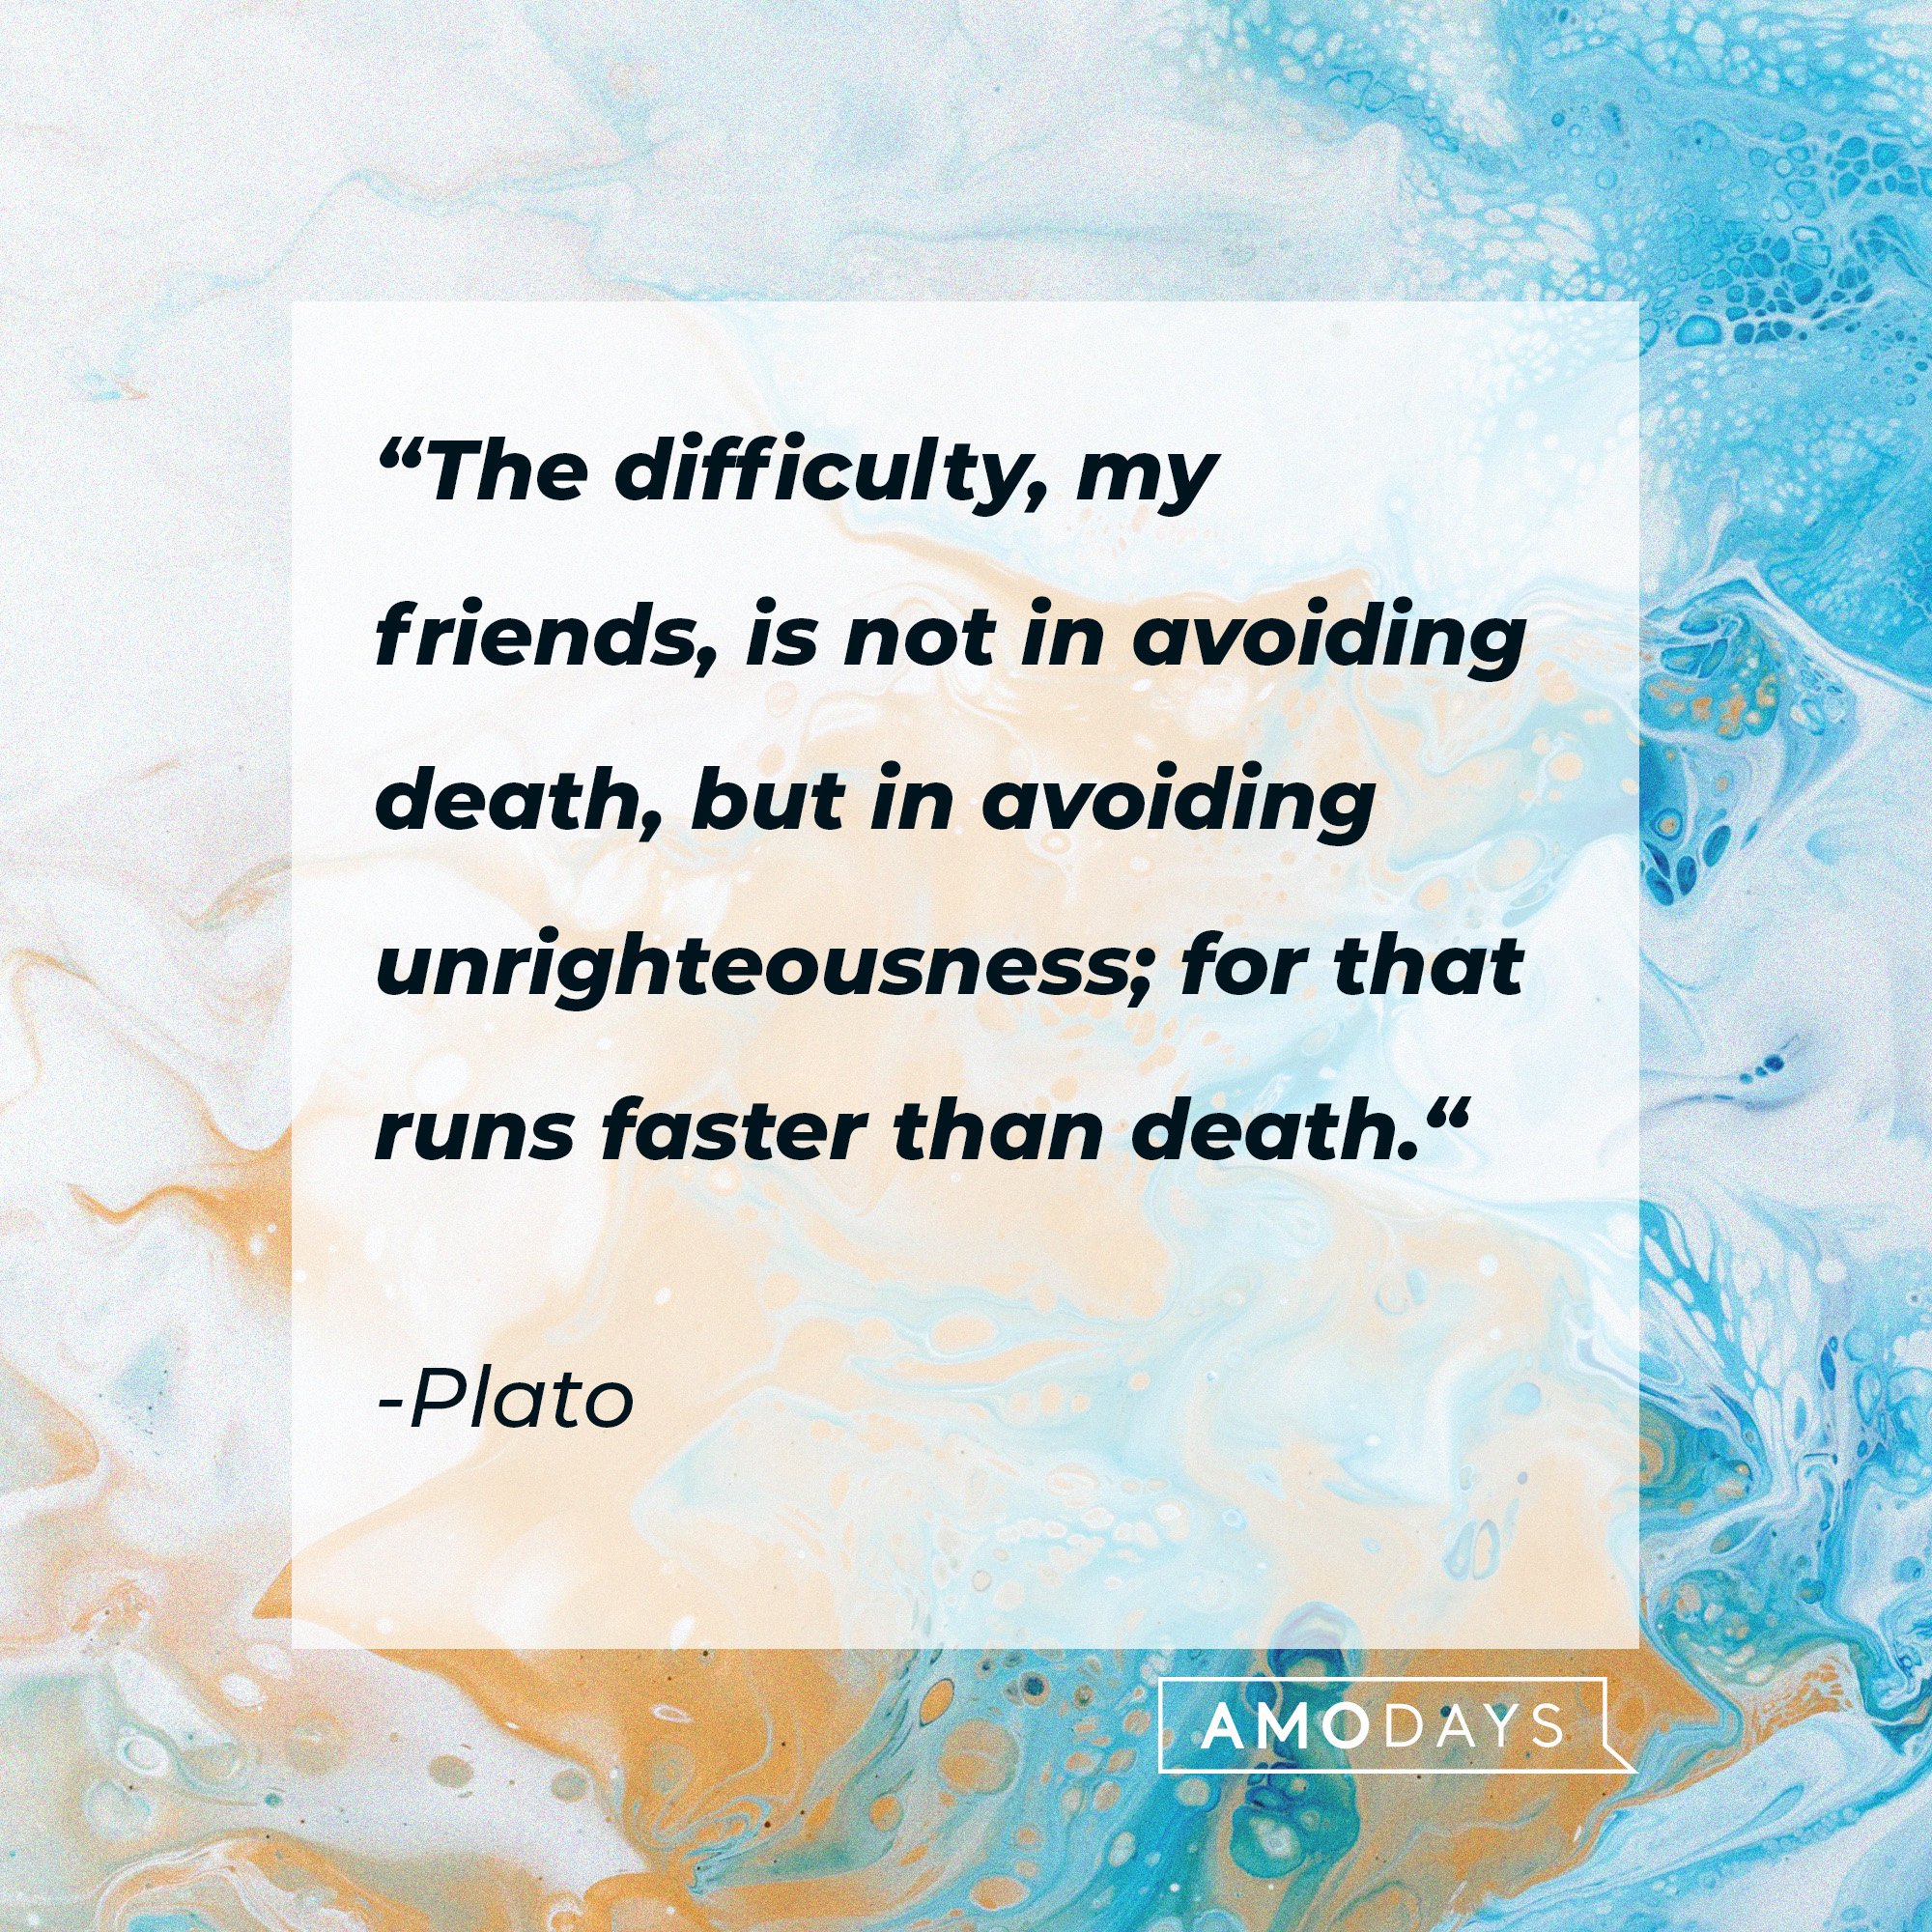 Plato's quote: “The difficulty, my friends, is not in avoiding death, but in avoiding unrighteousness; for that runs faster than death.“ | Image: AmoDays